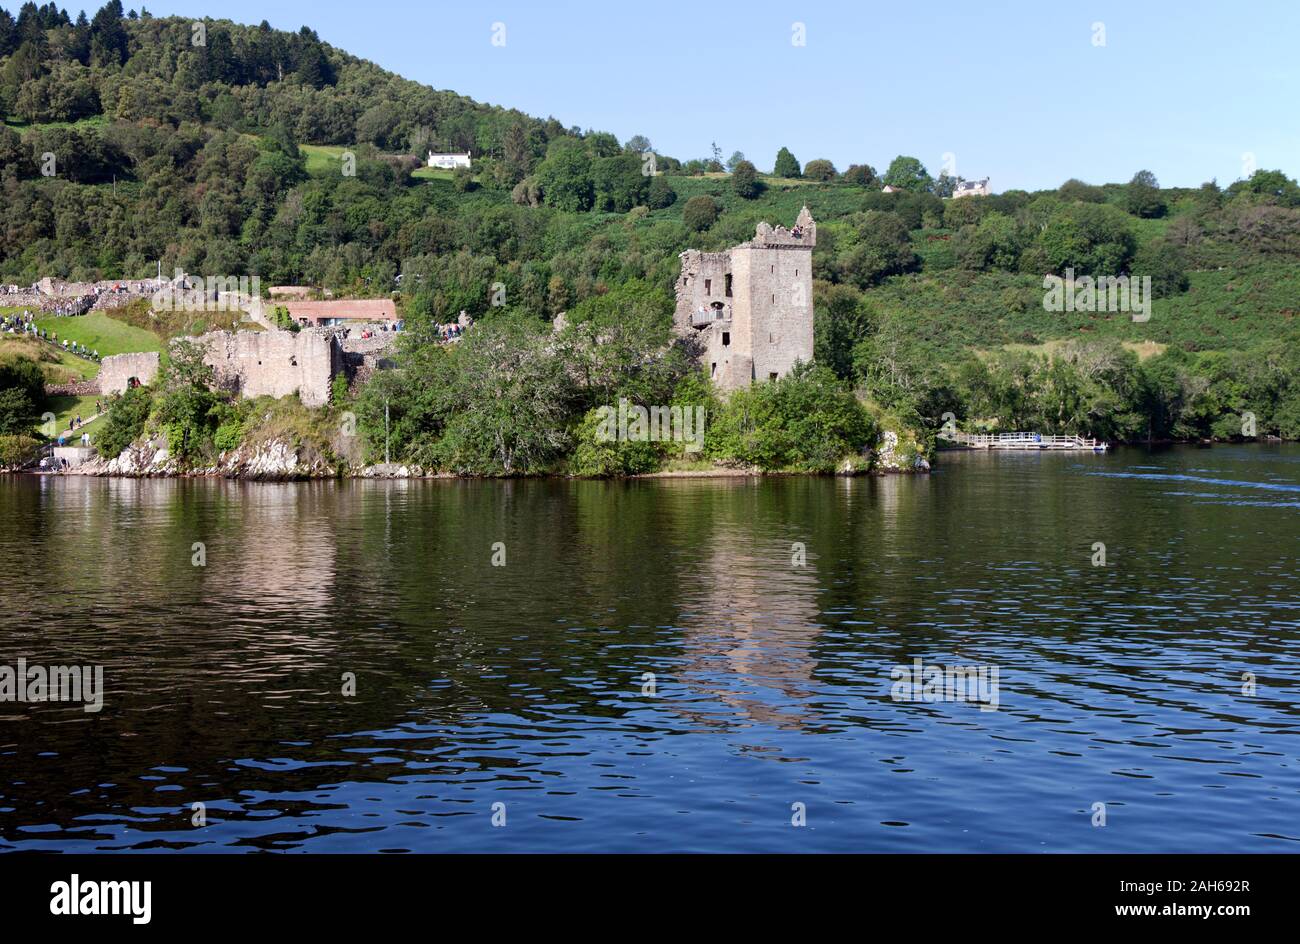 Holding some 1000 years of history, the ruins of Urquhart Castle at the edge of Loch Ness in the Scottish Highlands now draw hundreds of tourists dail Stock Photo